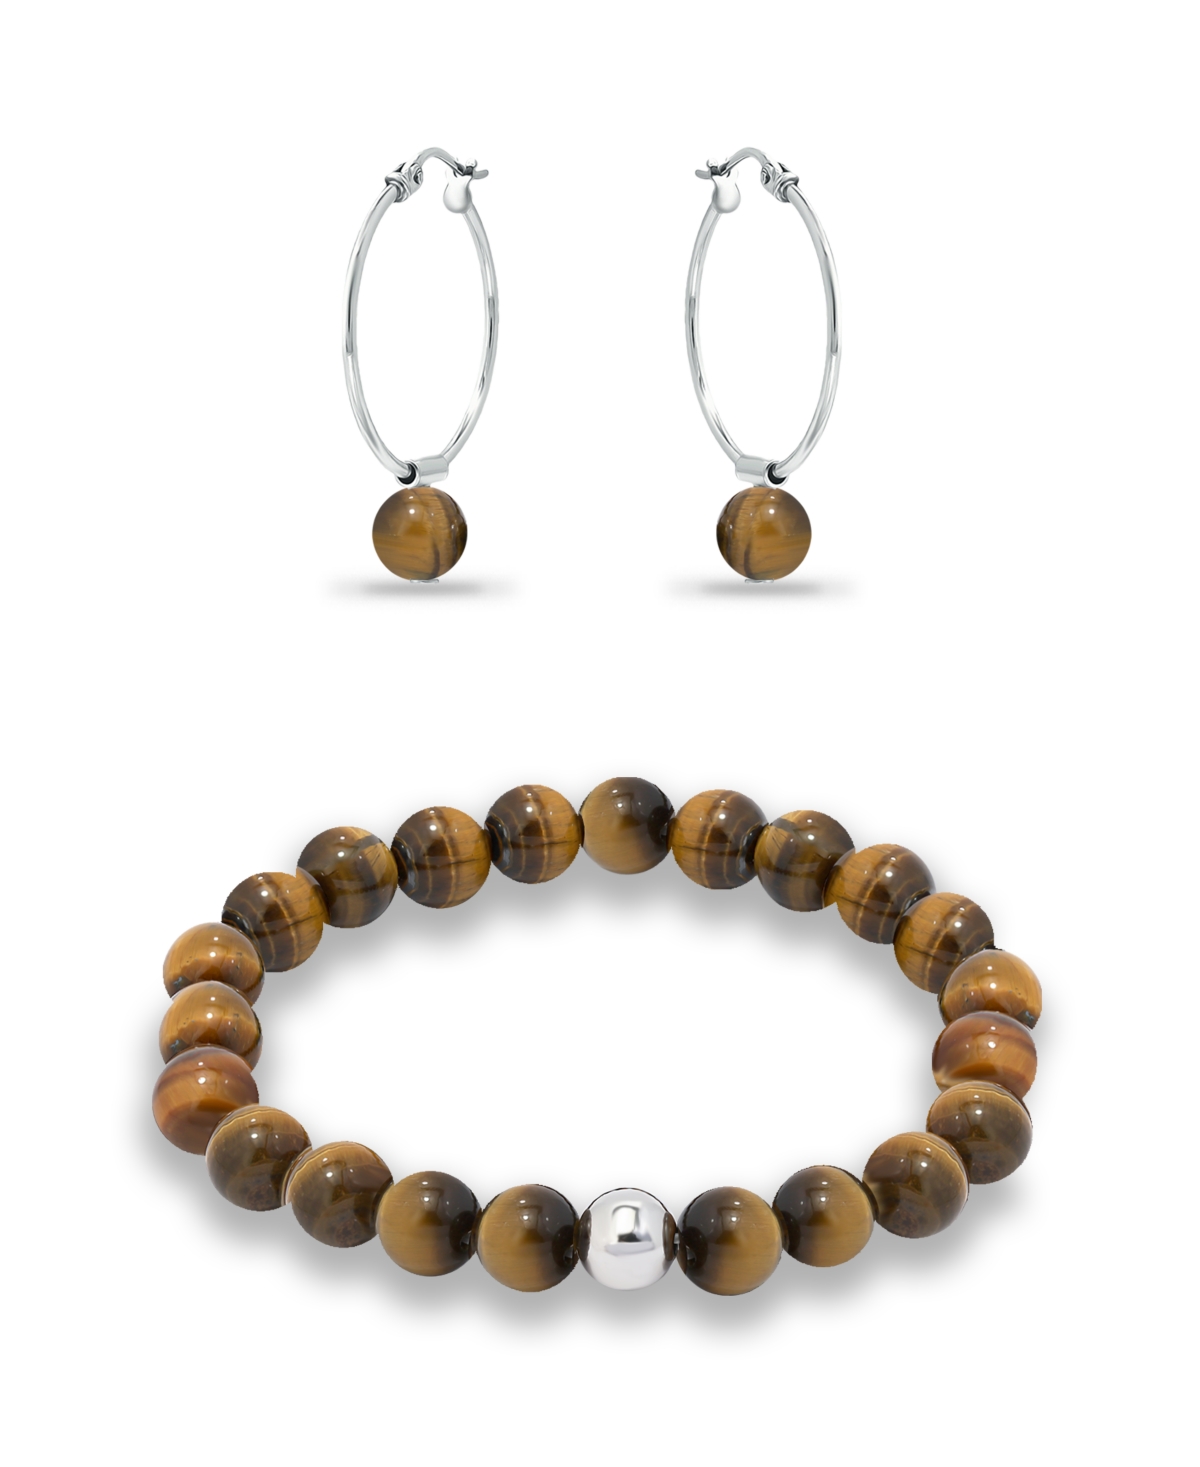 Macy's Silver Plated Multi Genuine Stone Bracelet And Earring, 2 Piece Set In Tigers Eye